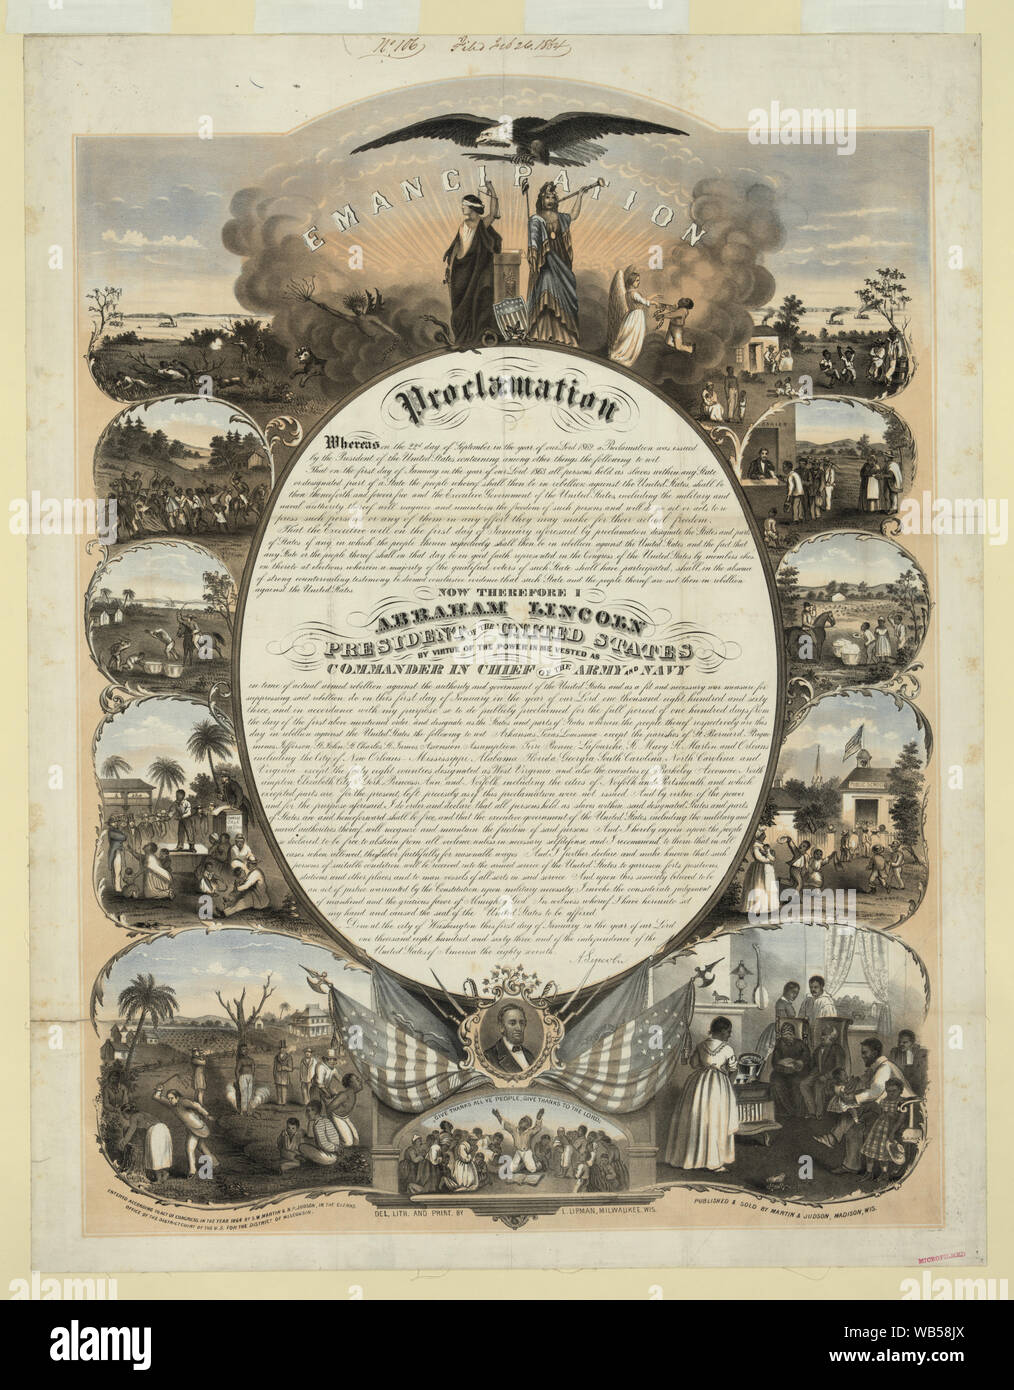 Emancipation Proclamation Abstract: Print shows at center the text of the Emancipation Proclamation with vignettes surrounding it; on the left are scenes related to slavery and on the right are scenes showing the benefits attained through freedom; also shows Justice and Columbia at the top center beneath a bald eagle and a portrait of Abraham Lincoln at bottom center above a scene of former slaves giving thanks. Stock Photo